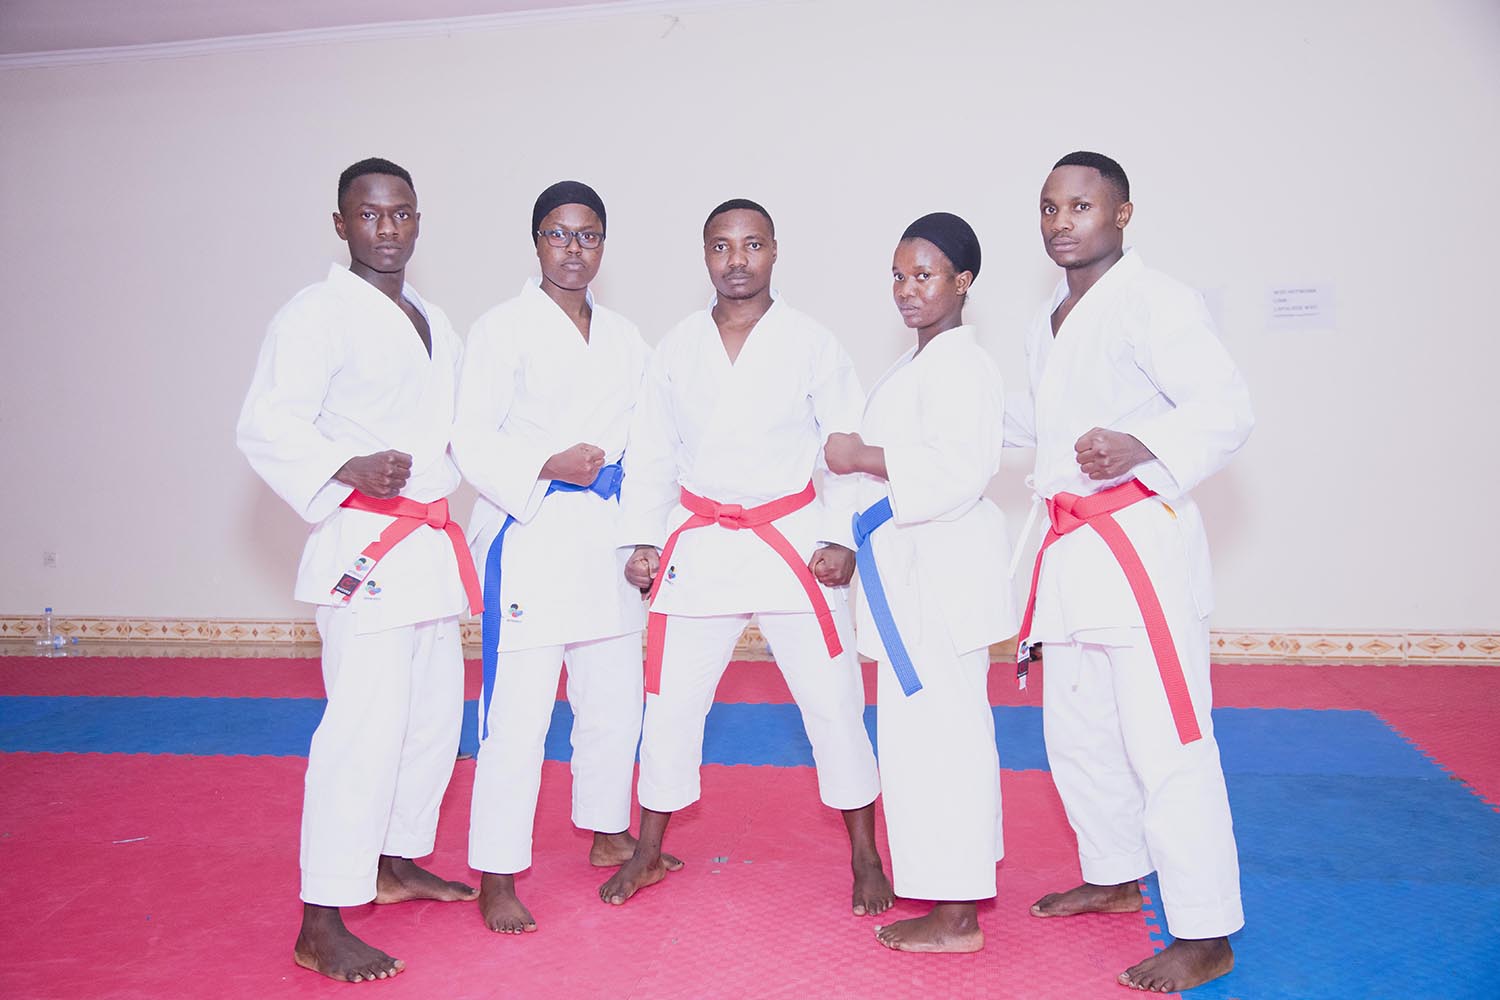 Players from Zen Karate-Do Club pose for a photo after training on Wednesday. Emmanuel Kwizera